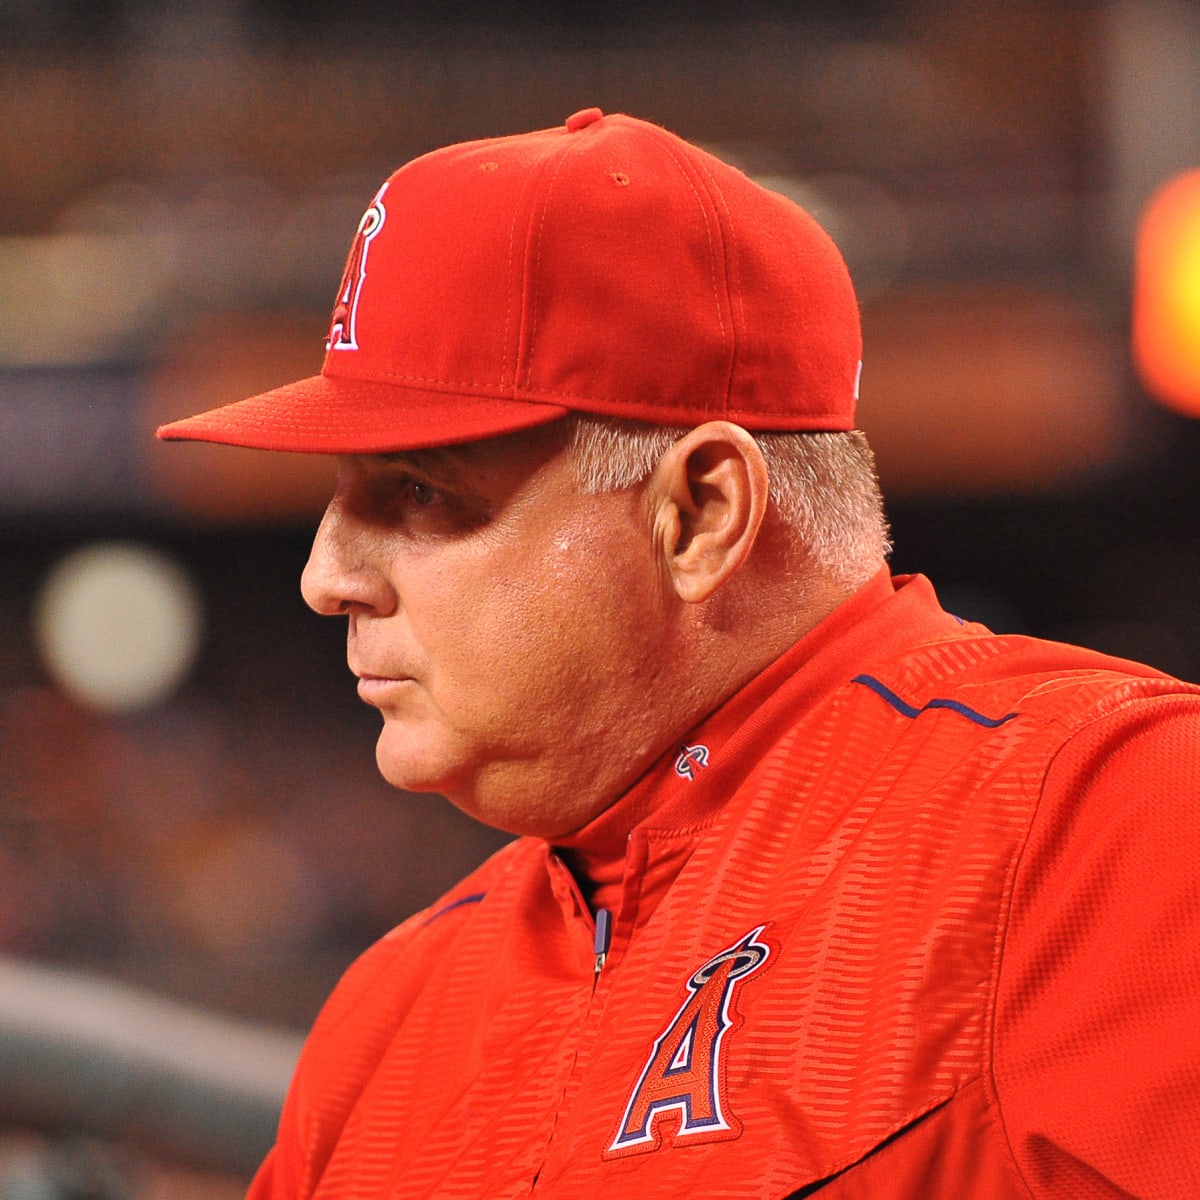 Mike Scioscia denies report he will step down as Angels manager